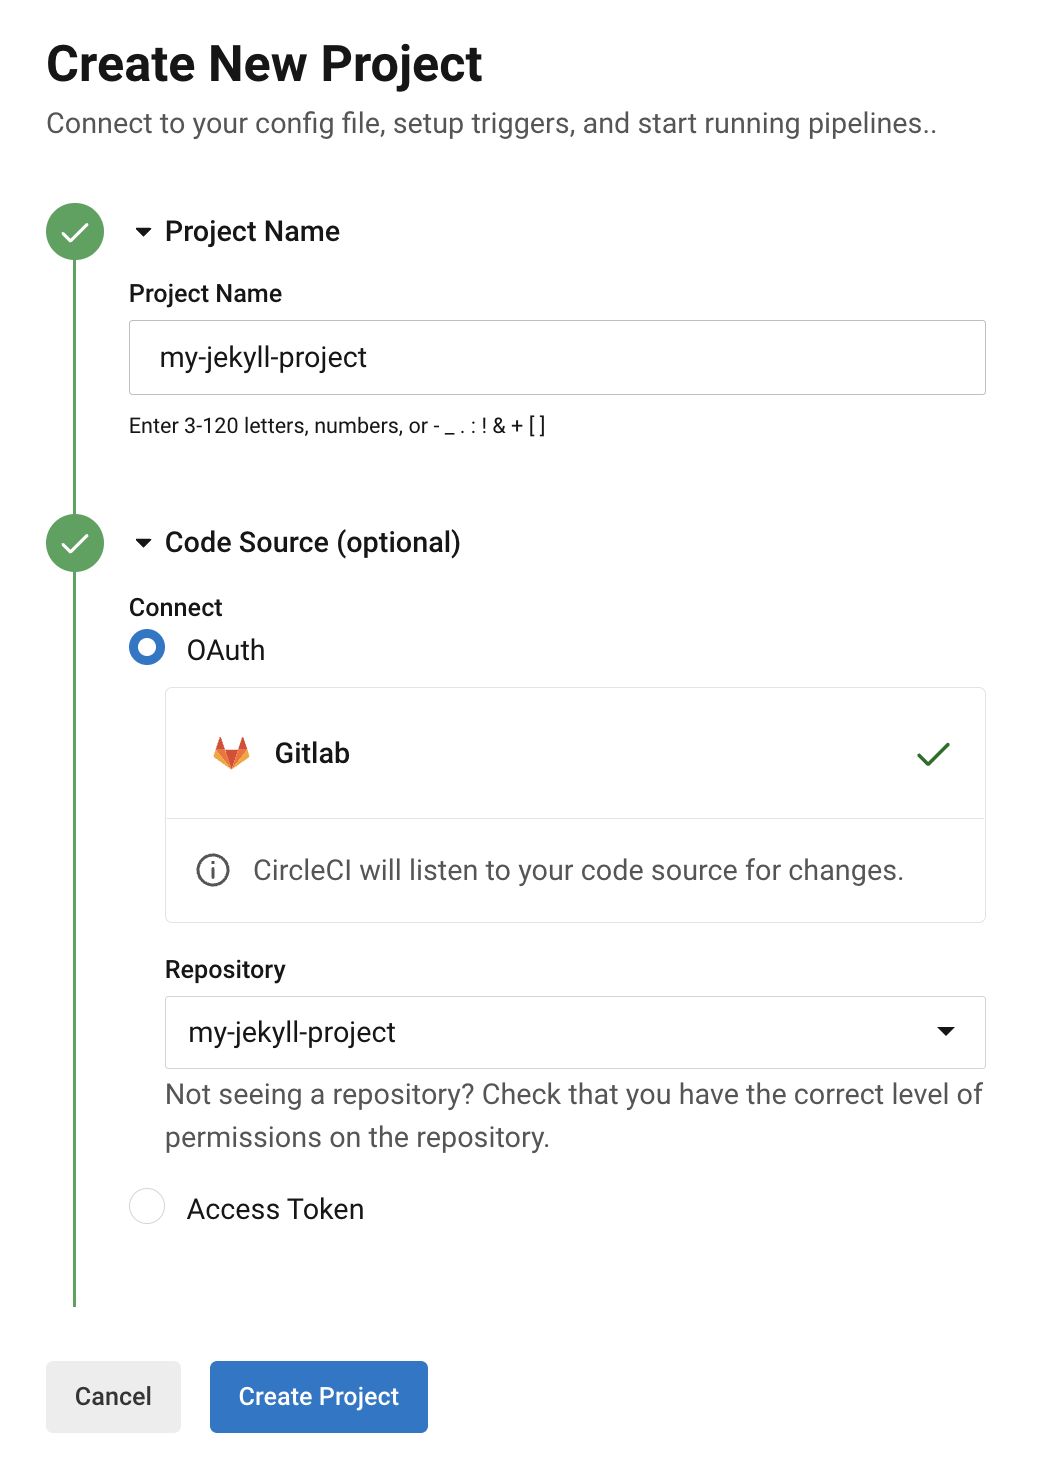 Successful GitLab connection via OAuth